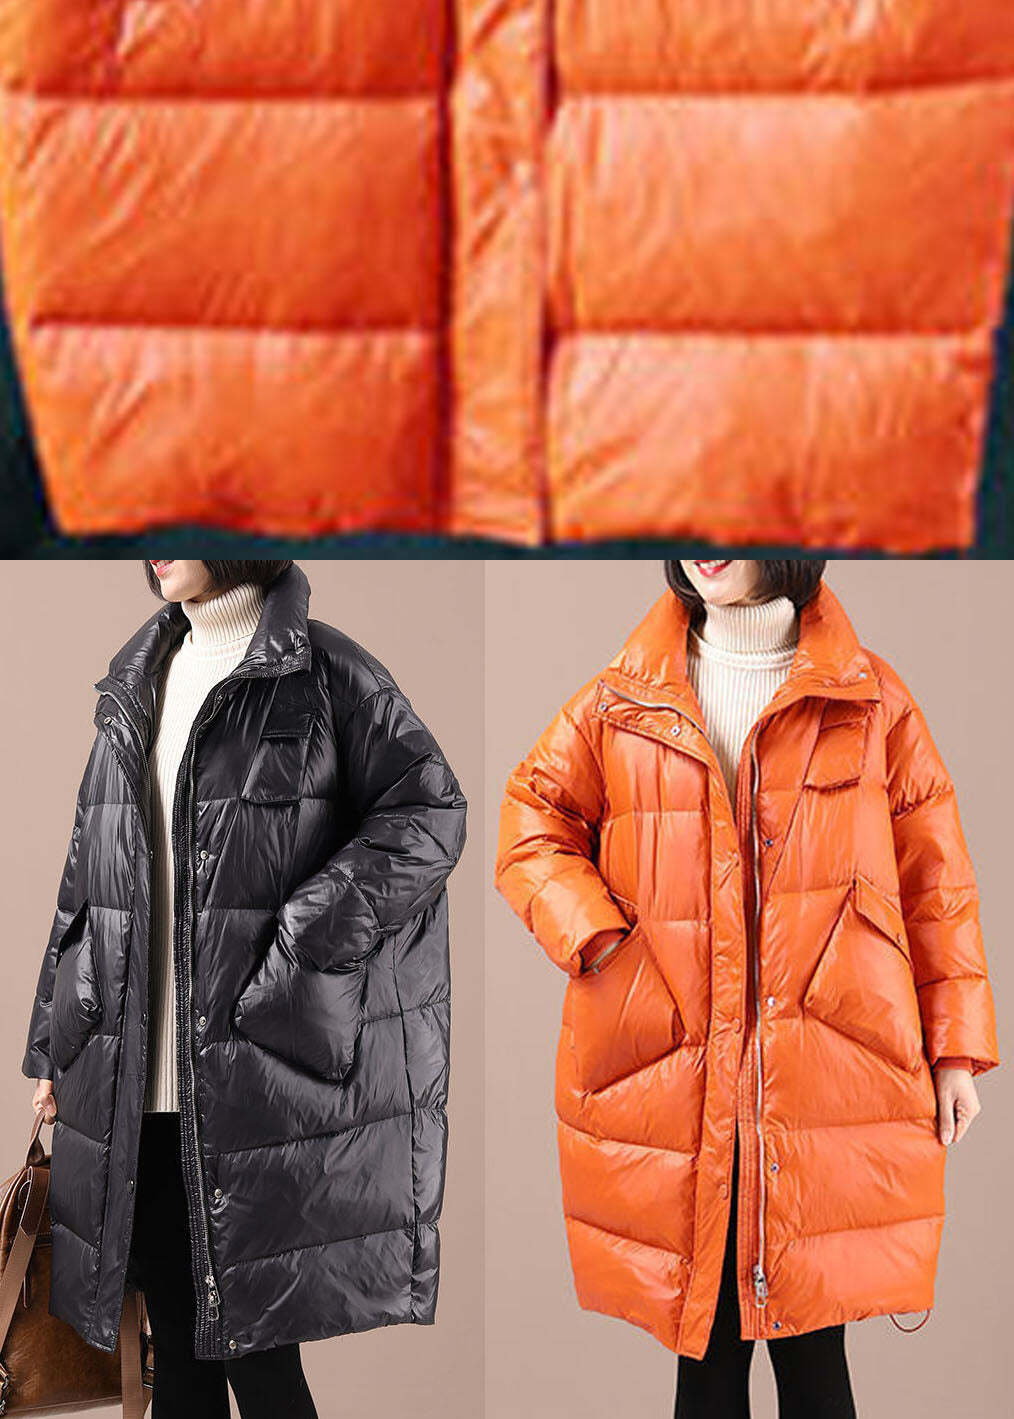 Chic Orange Loose Stand Collar Pockets Winter Duck Down Coats